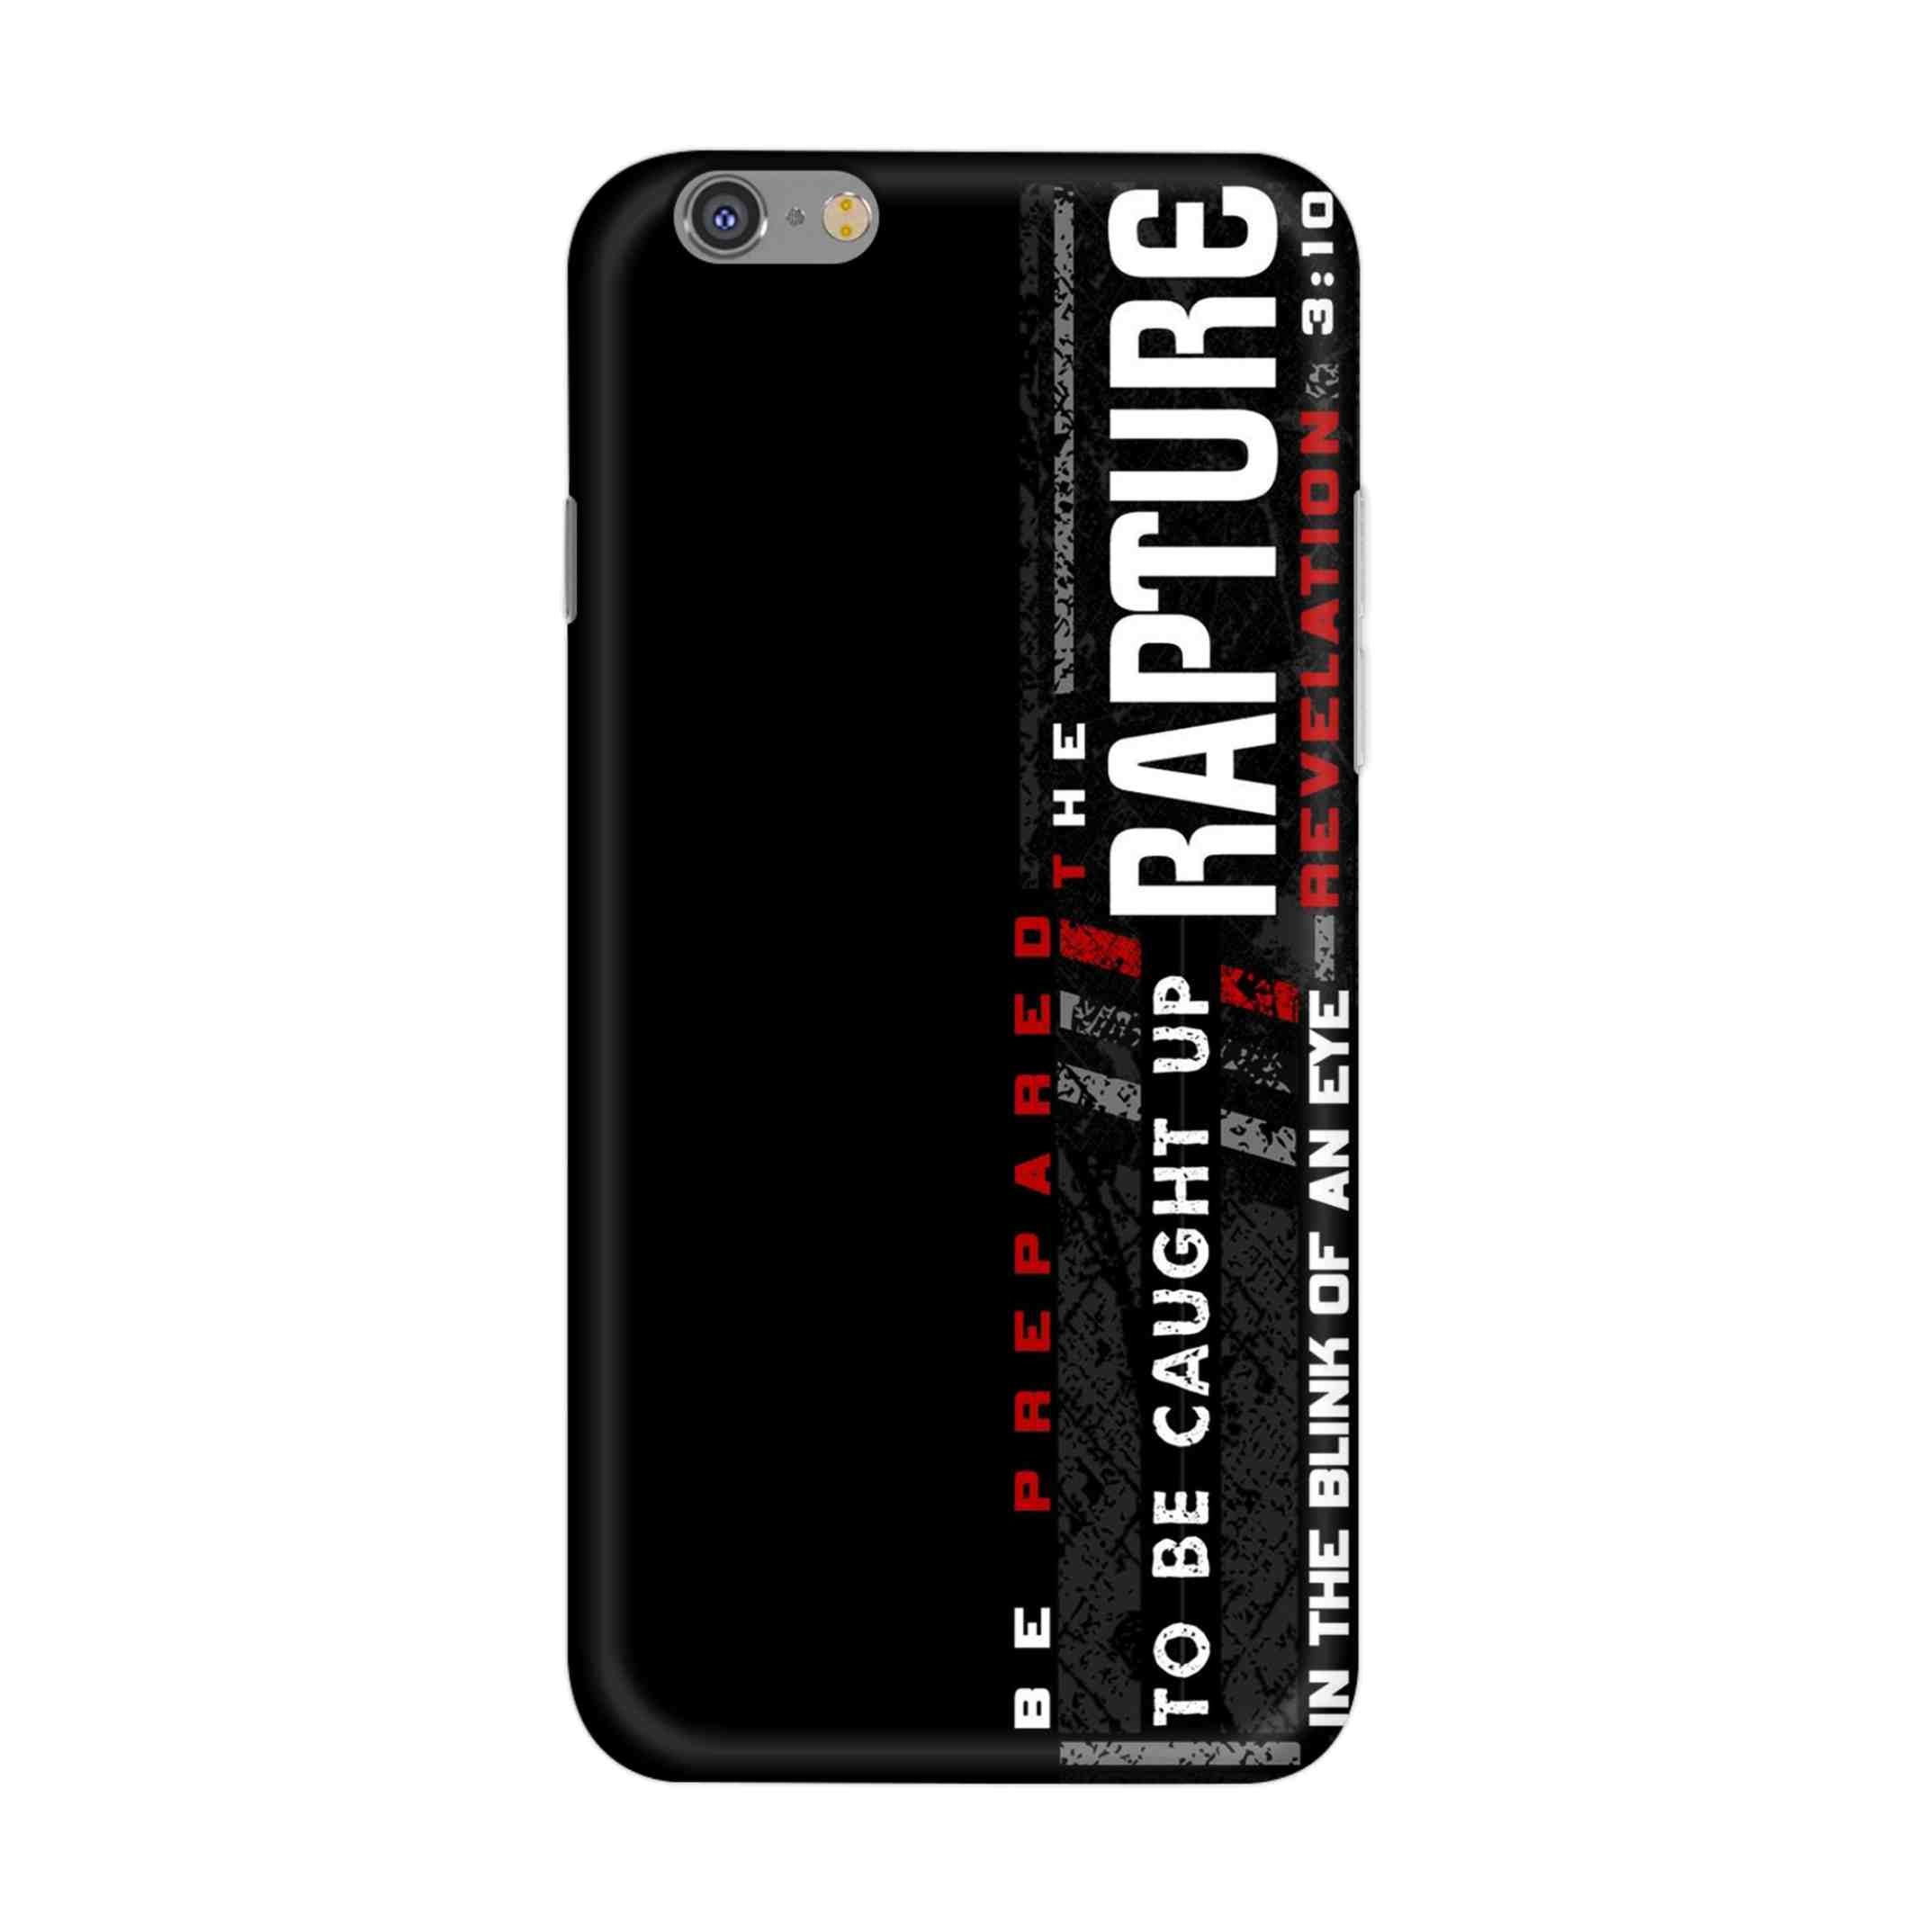 Buy Rapture Hard Back Mobile Phone Case/Cover For iPhone 6 / 6s Online